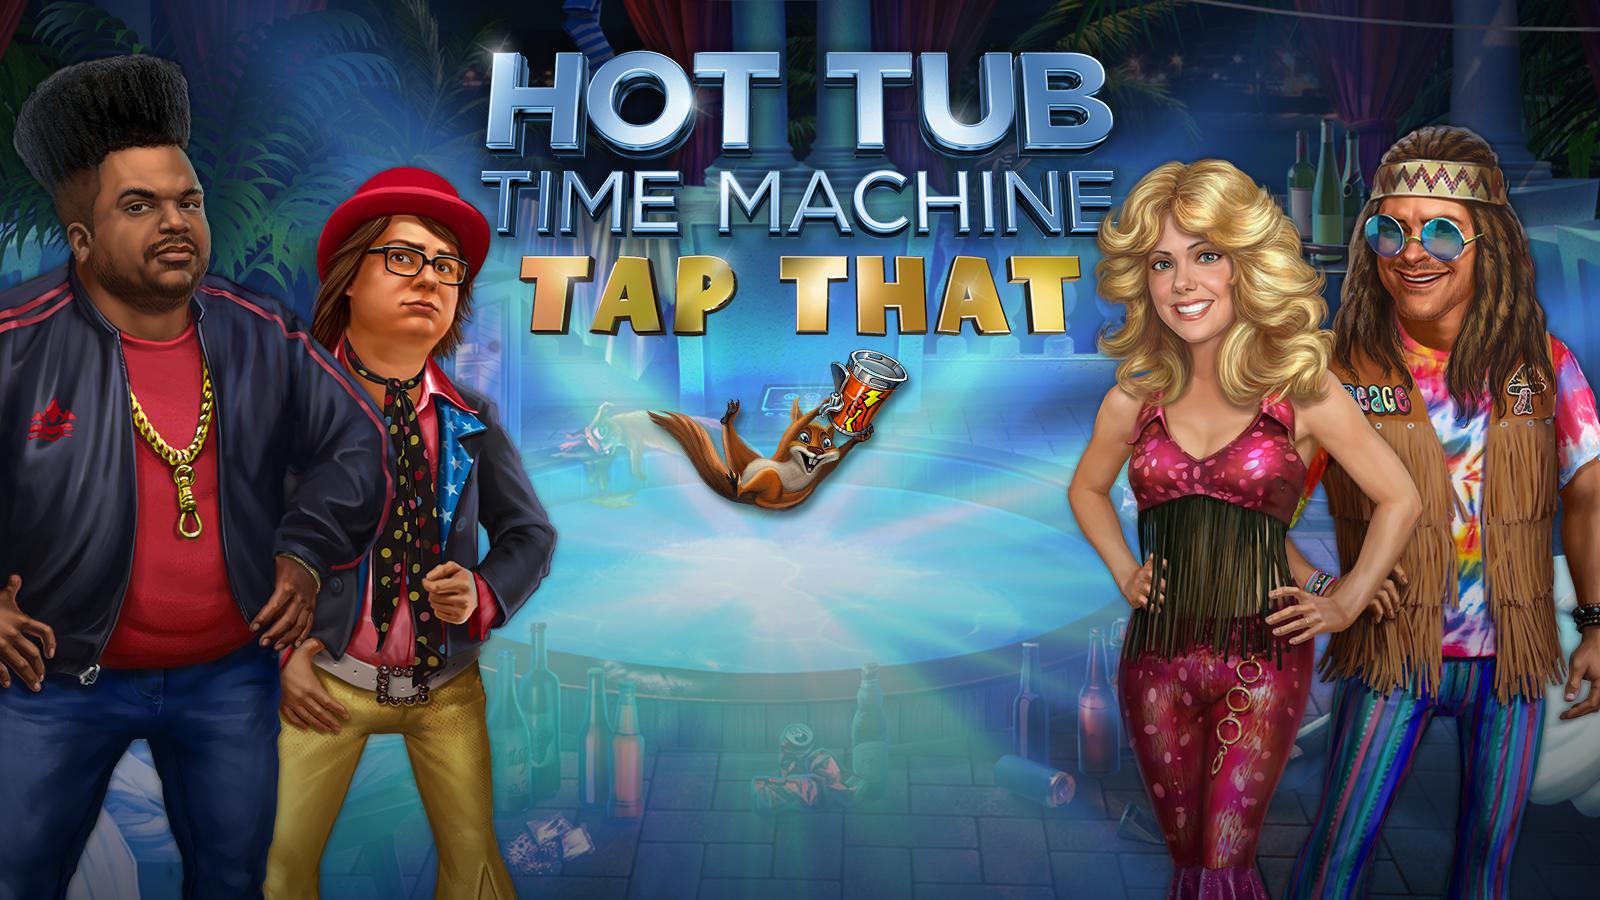 Hot Tub Time Machine Tap That For Android Apk Download